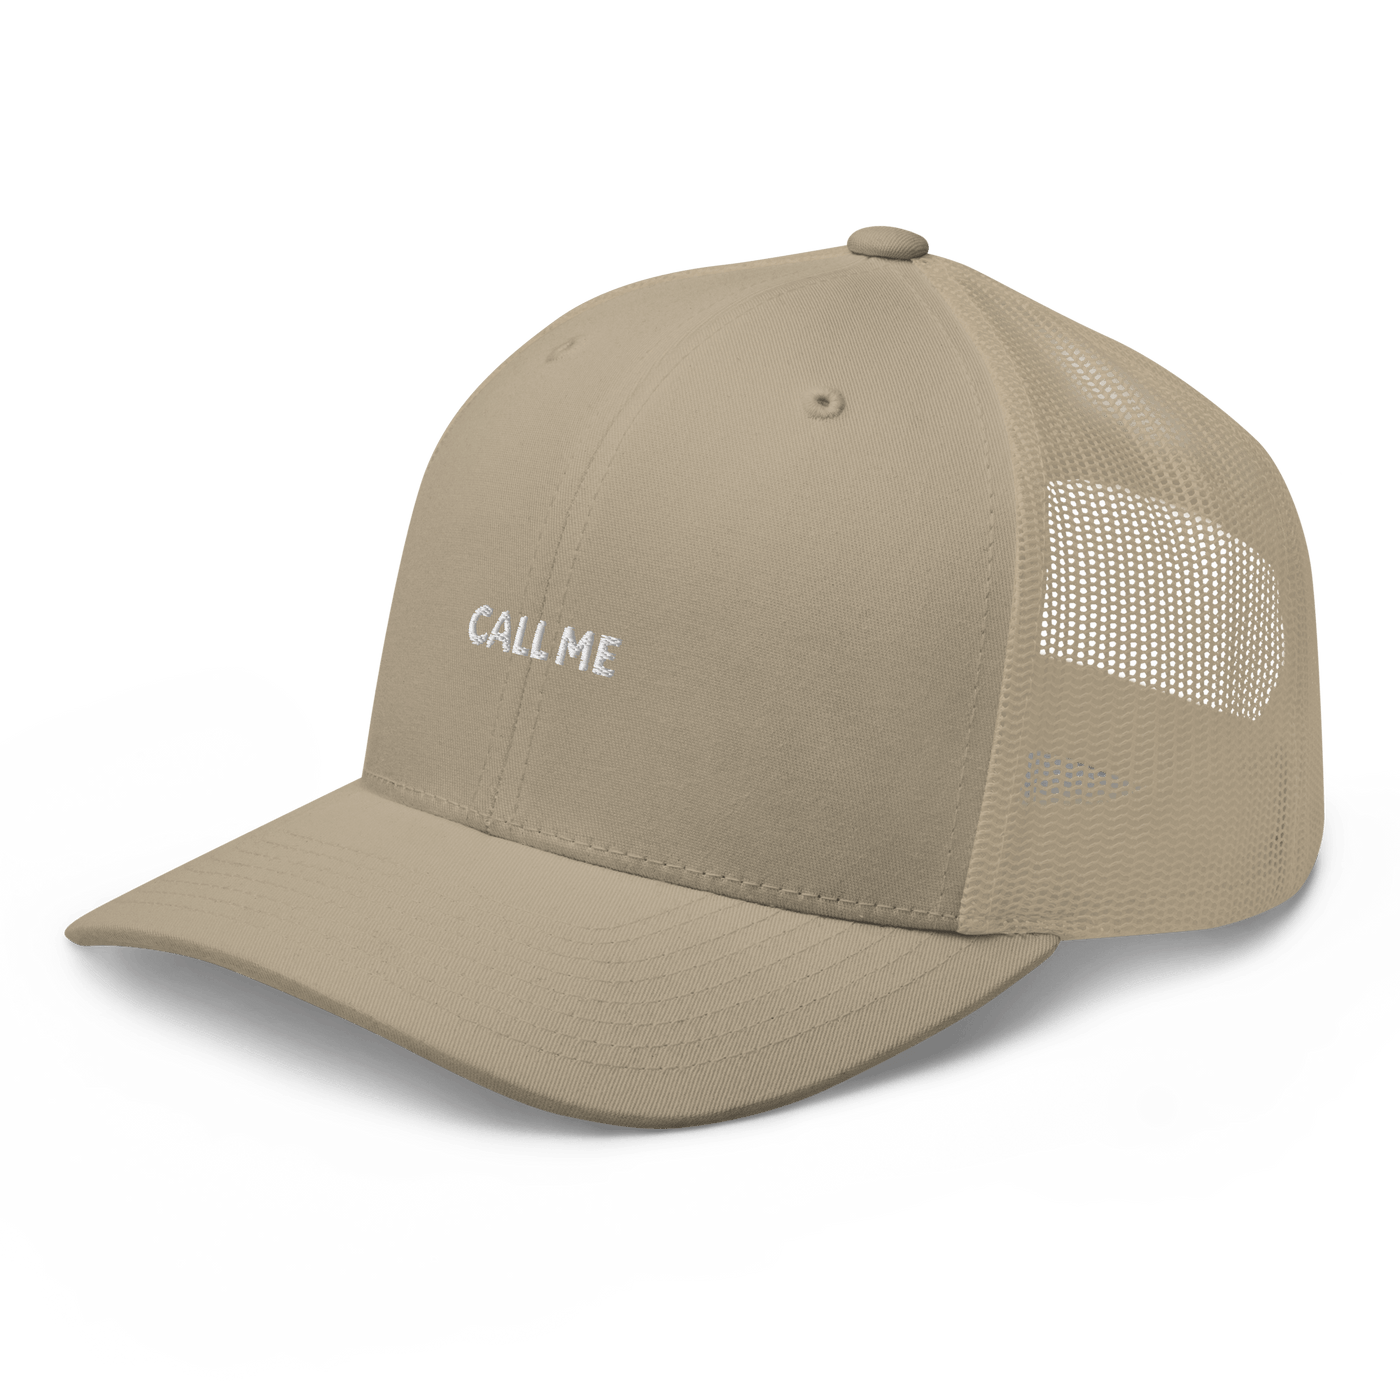 Call Me Trucker Cap - Red - - Just Another Cap Store